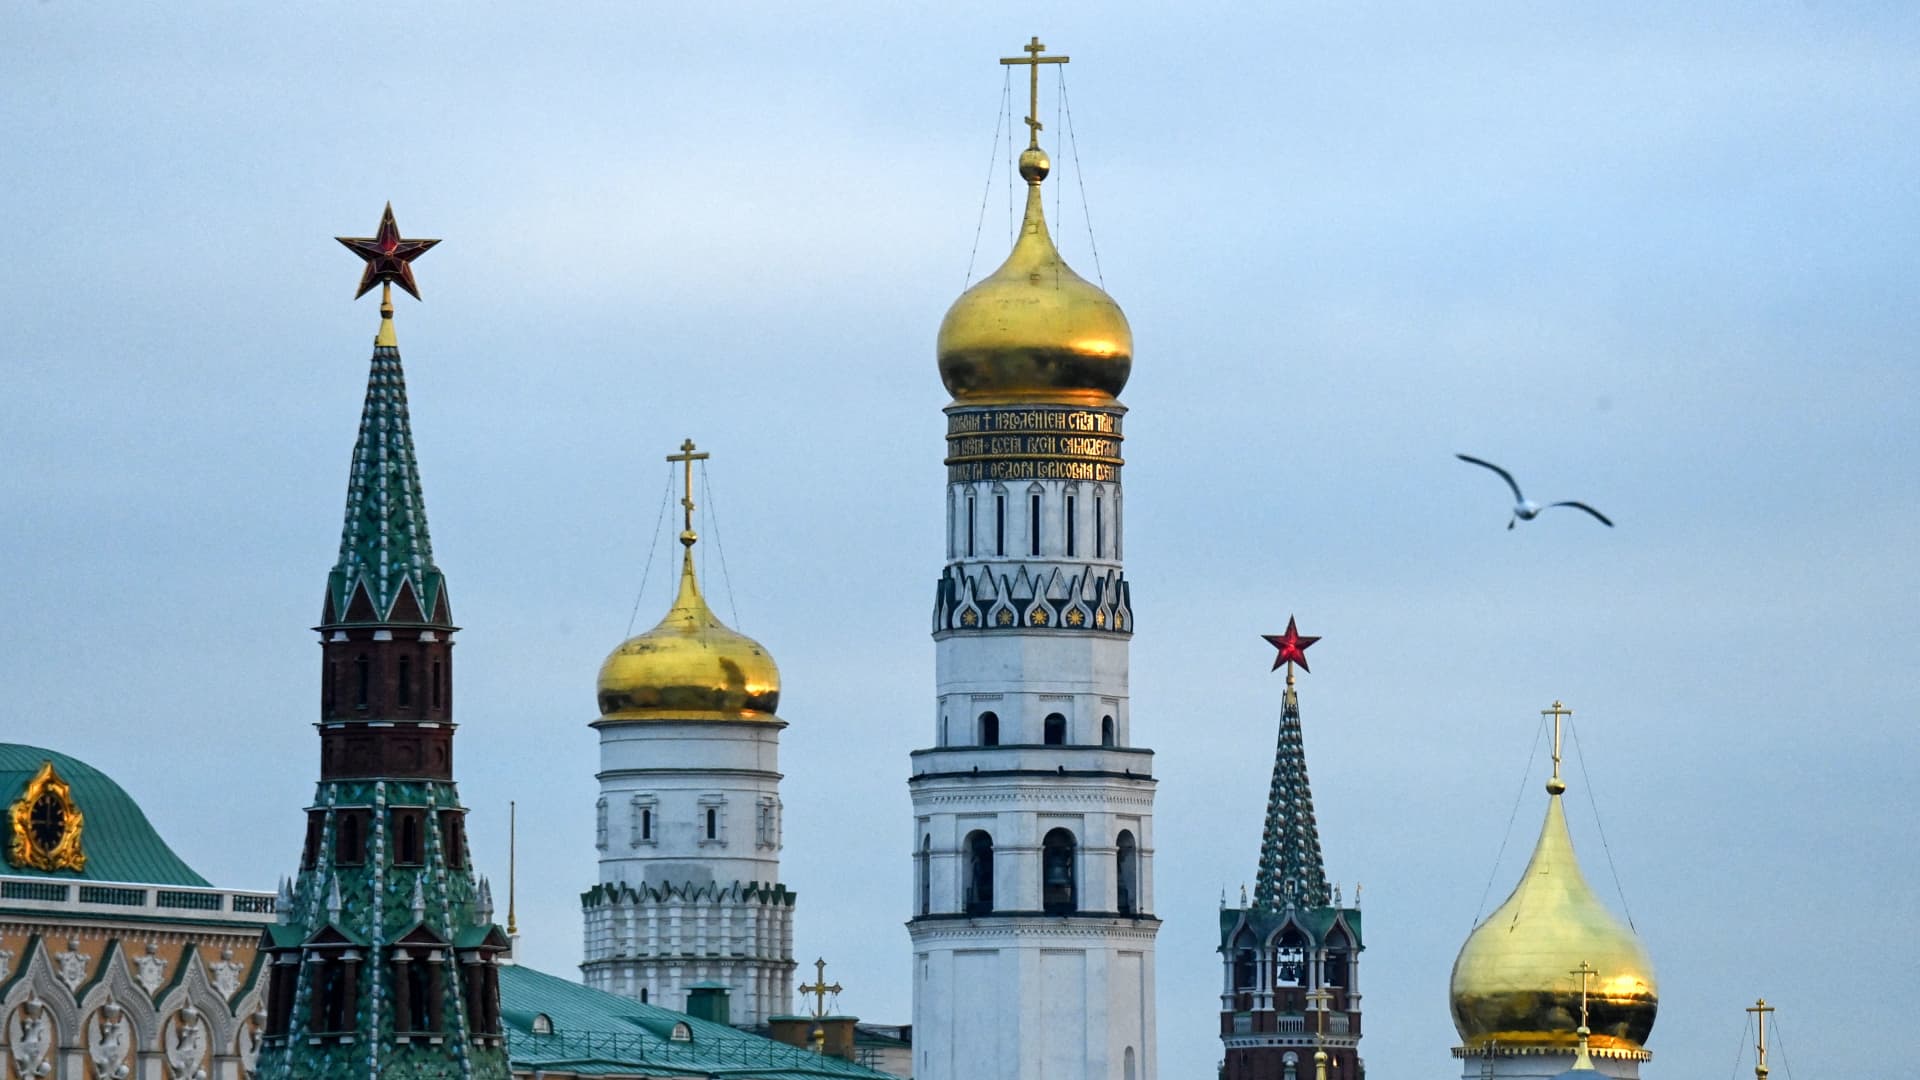 The Kremlin towers and Ivan the Great Cathedral in Moscow.